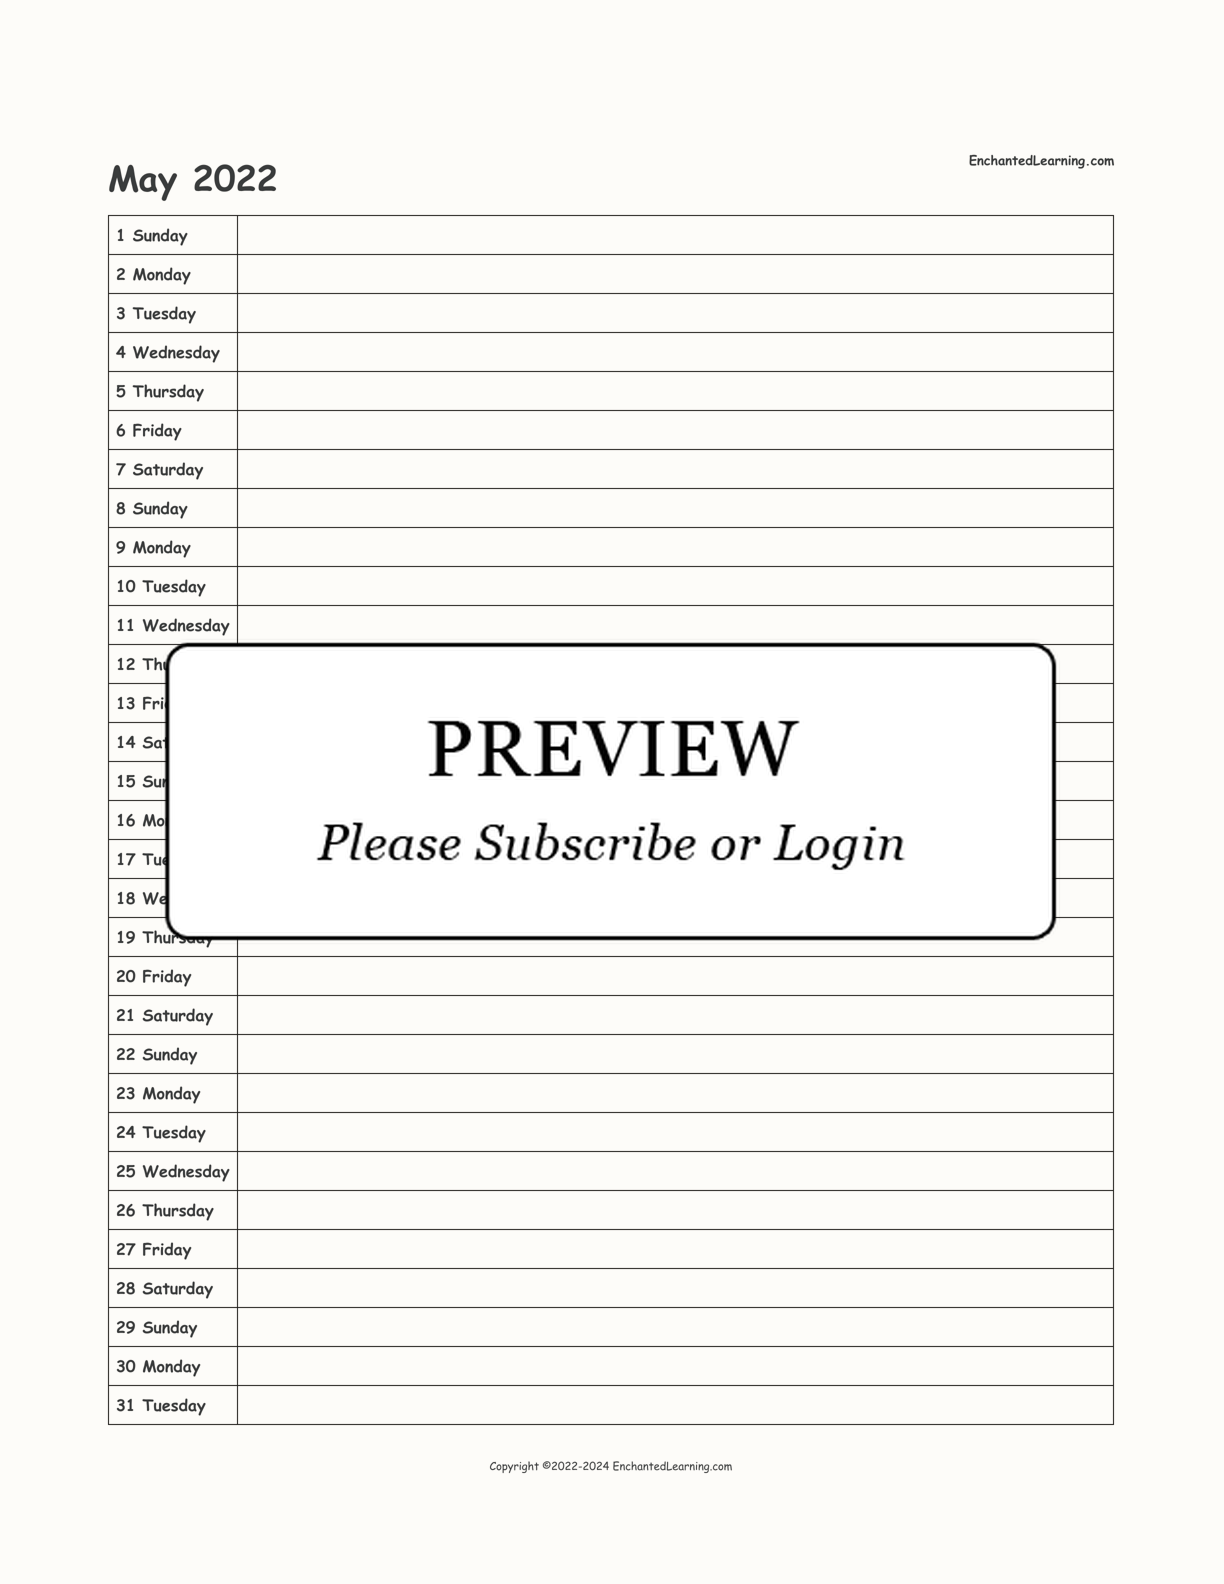 2022 Scheduling Calendar interactive printout page 5